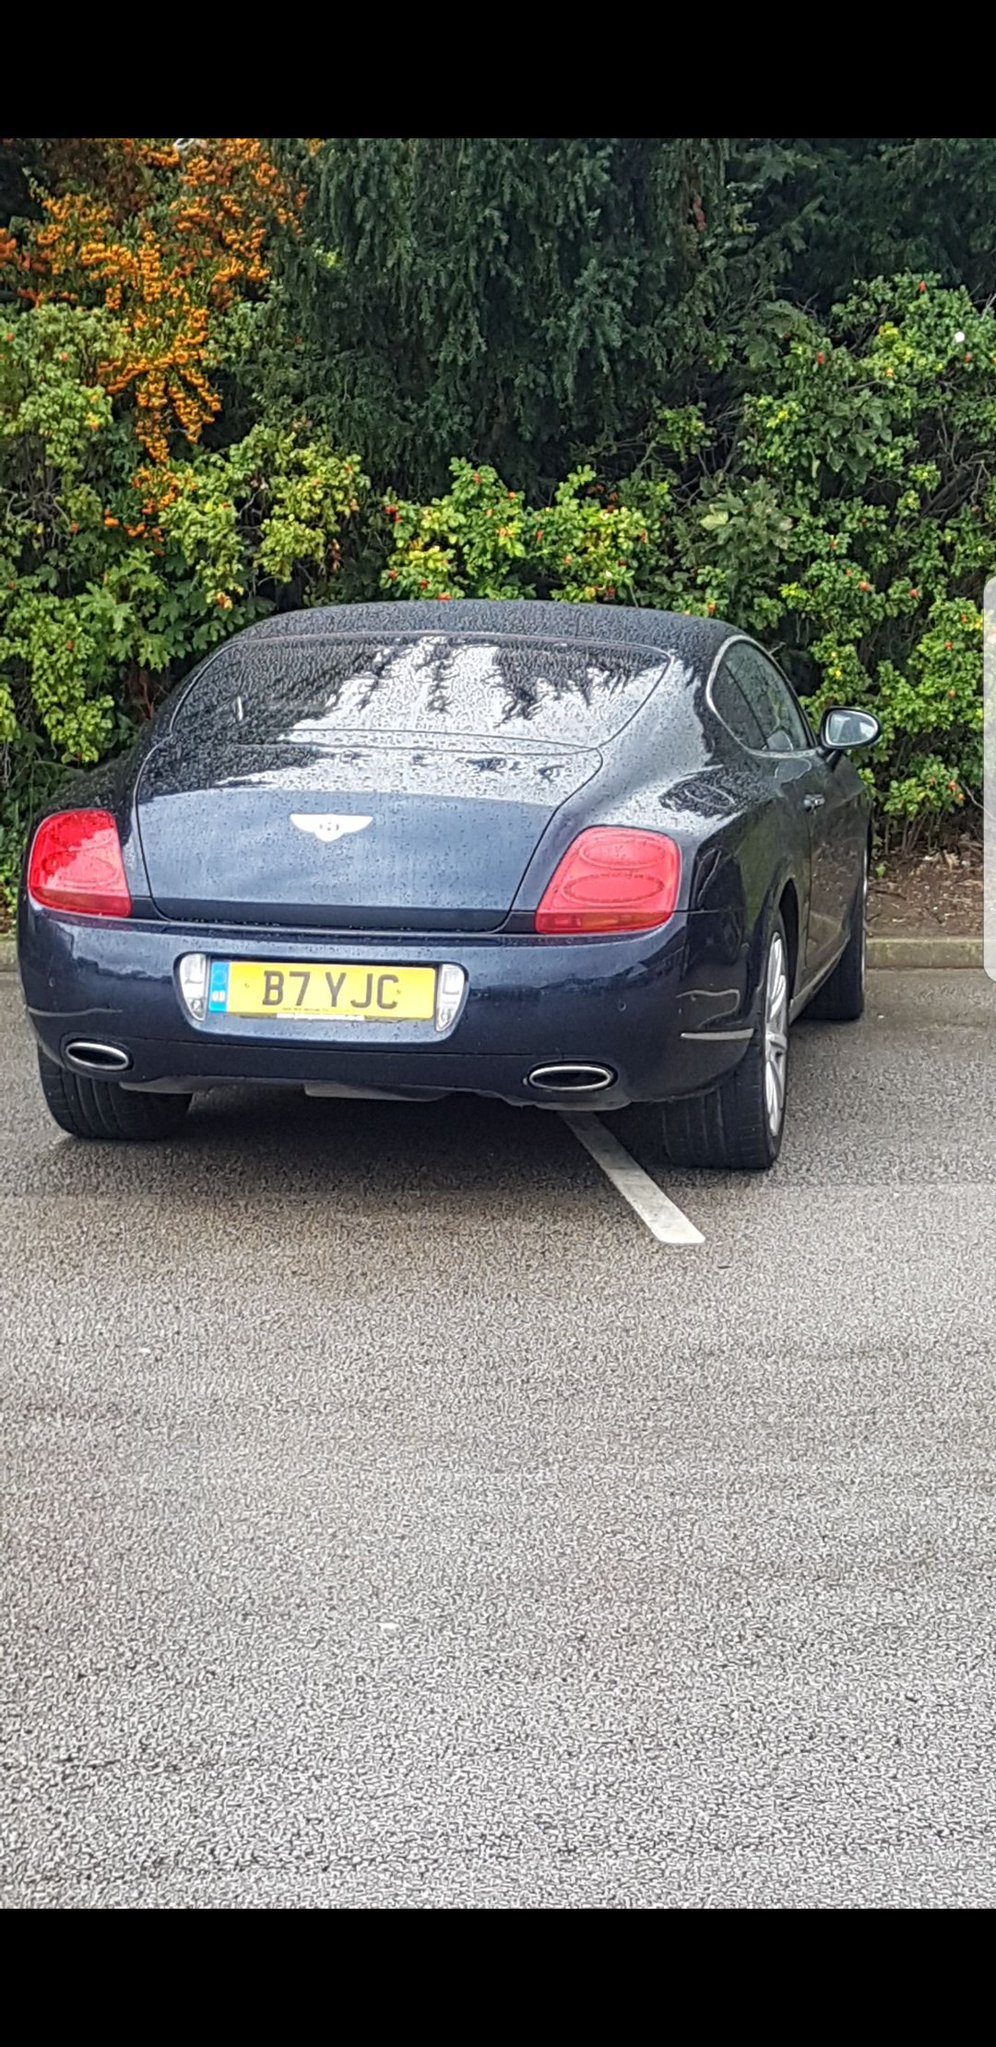 B7 YJC is an Inconsiderate Parker